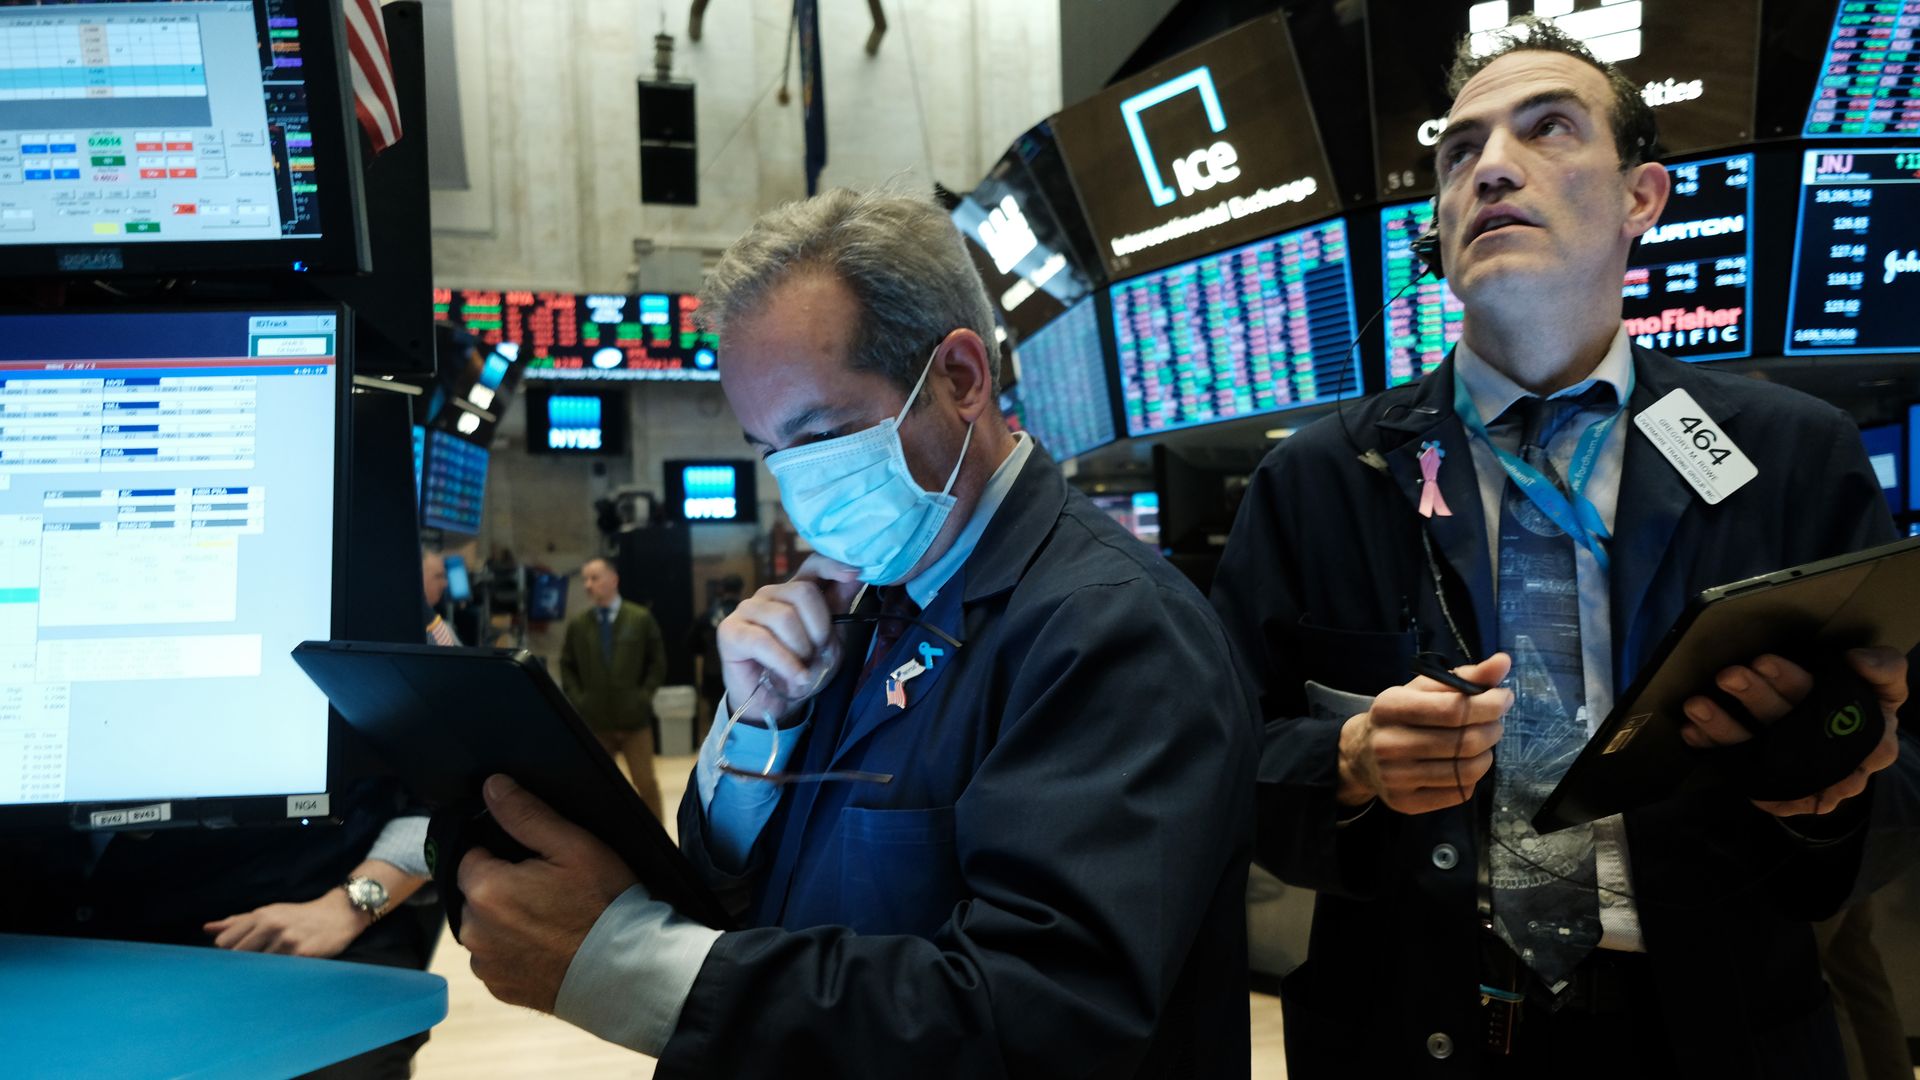 Traders on the floor of the New York Stock Exchange on March 20